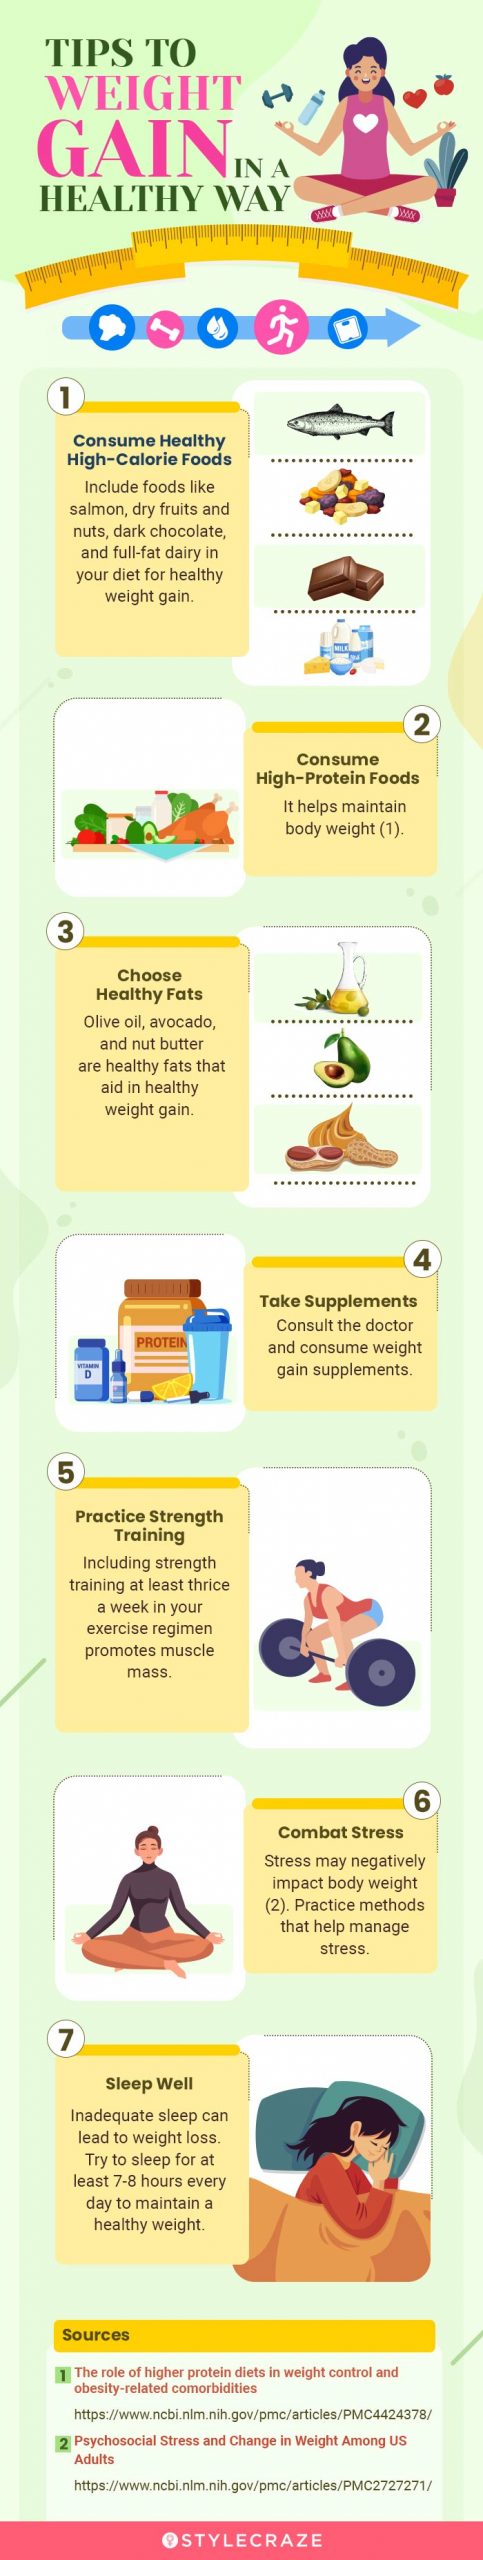 tips to gain weight in a healthy way (infographic)